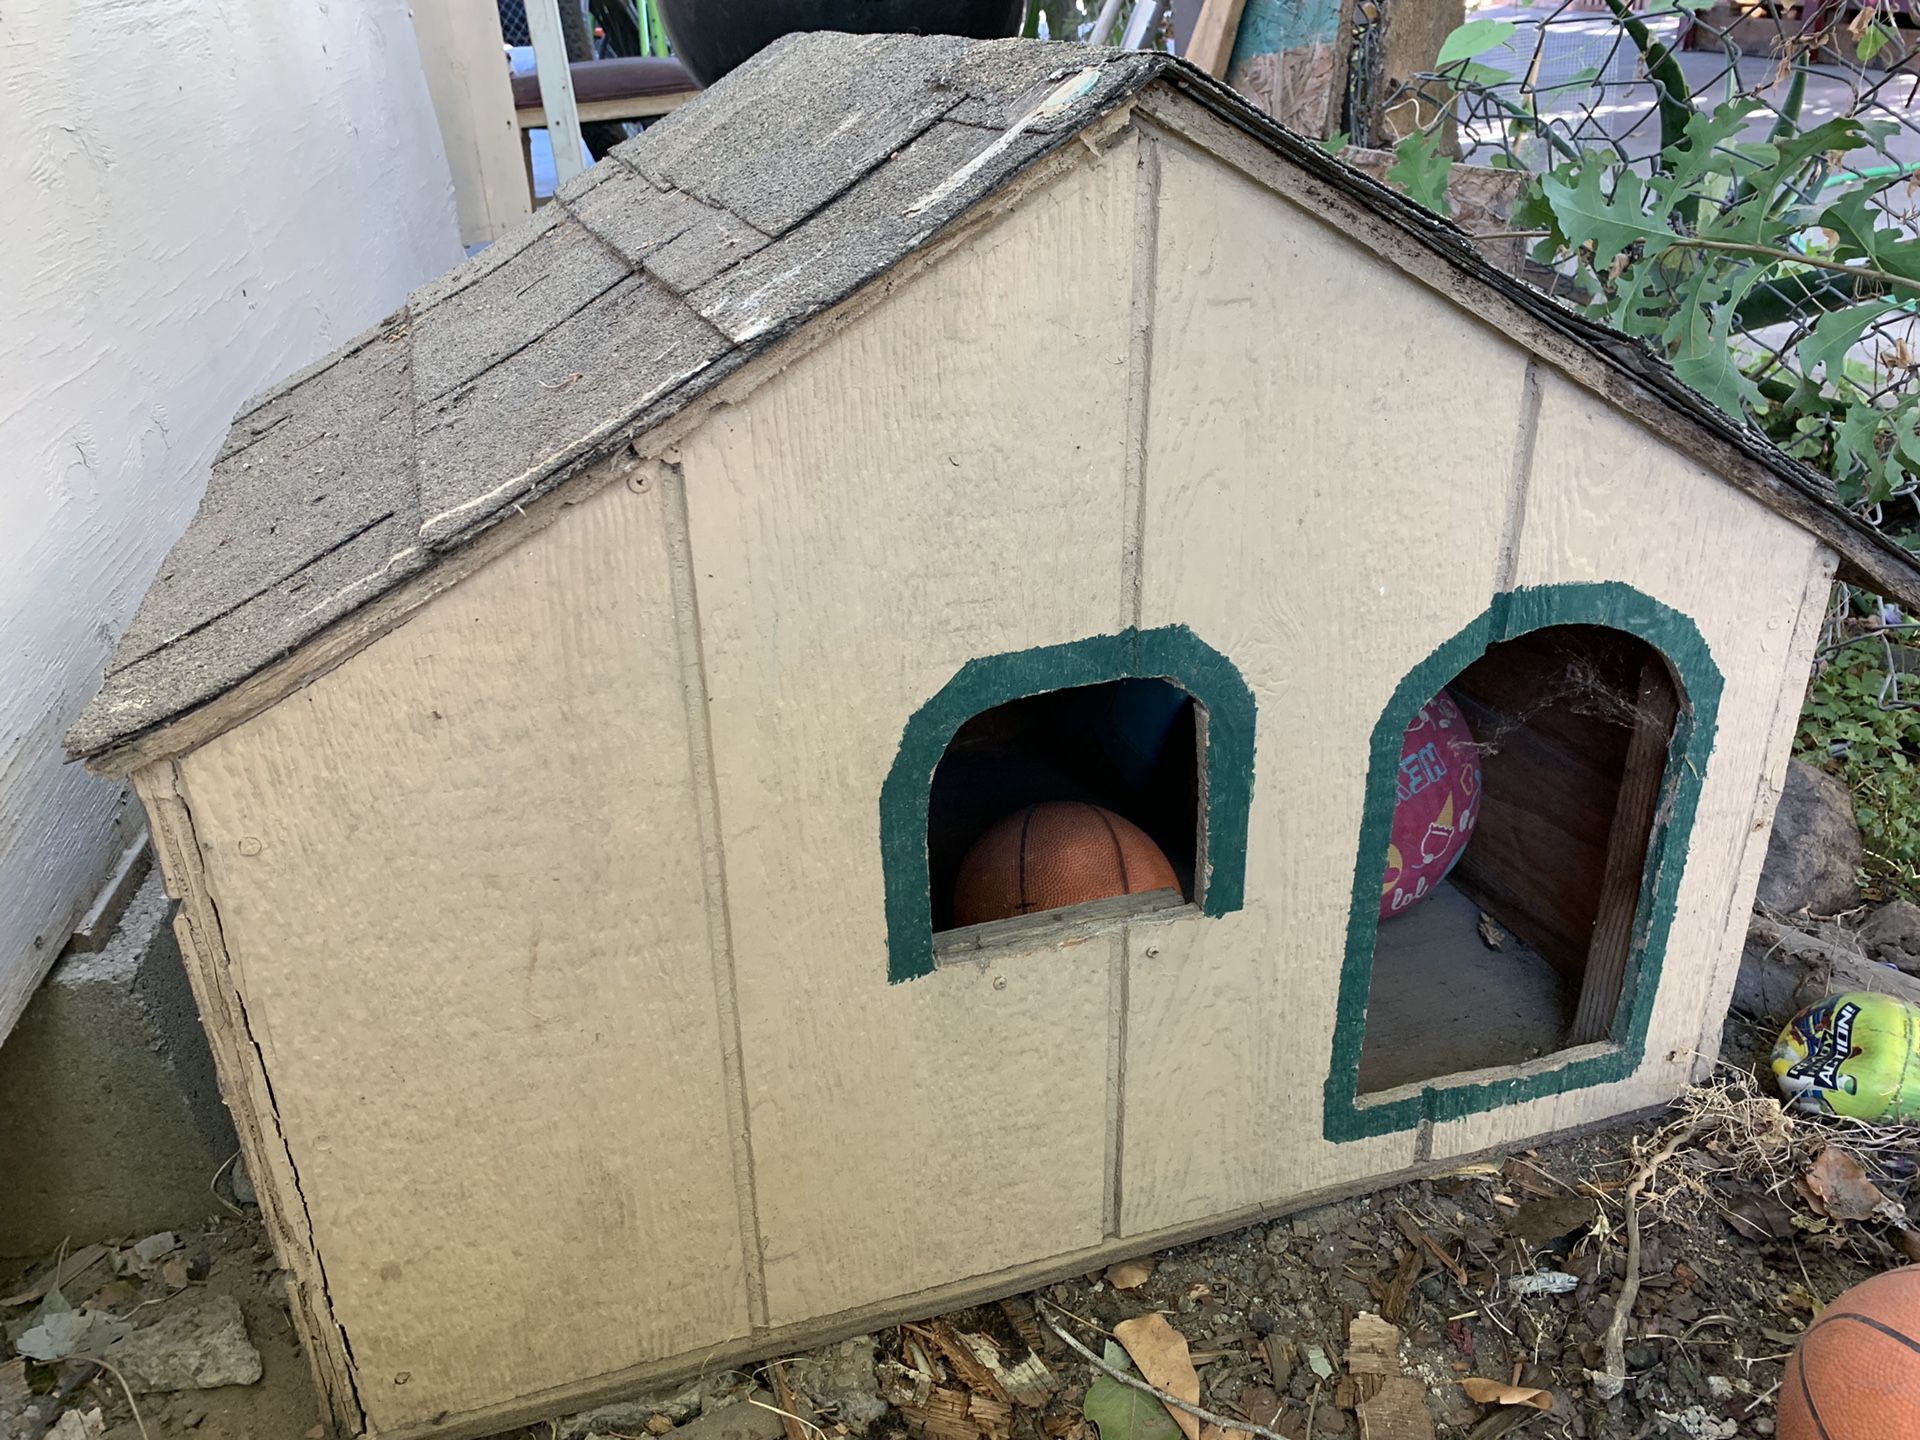 Dog house don’t need my dog don’t use it $30